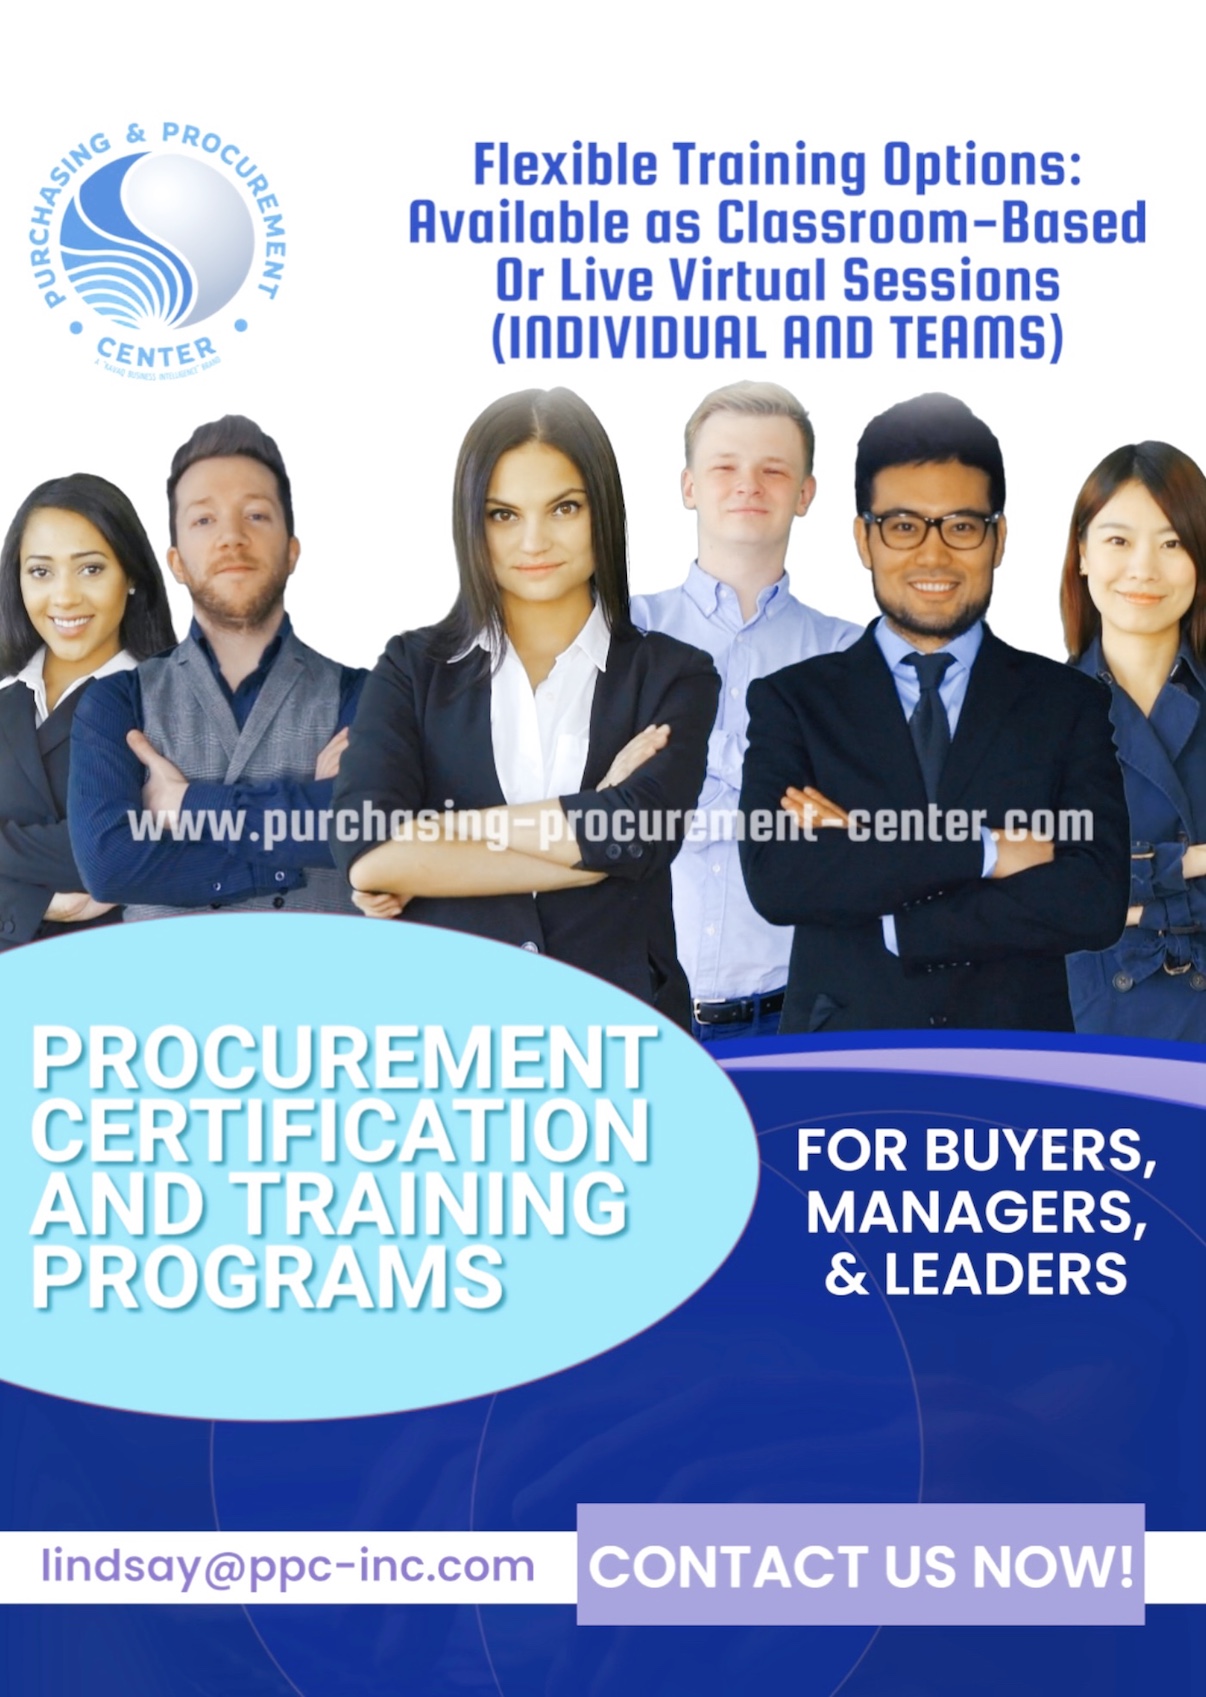 The Best Purchasing & Procurement Trainings for Buyers to Build World-Class Skills to Source Qualified Suppliers, Negotiate Effectively & Reduce Costs!